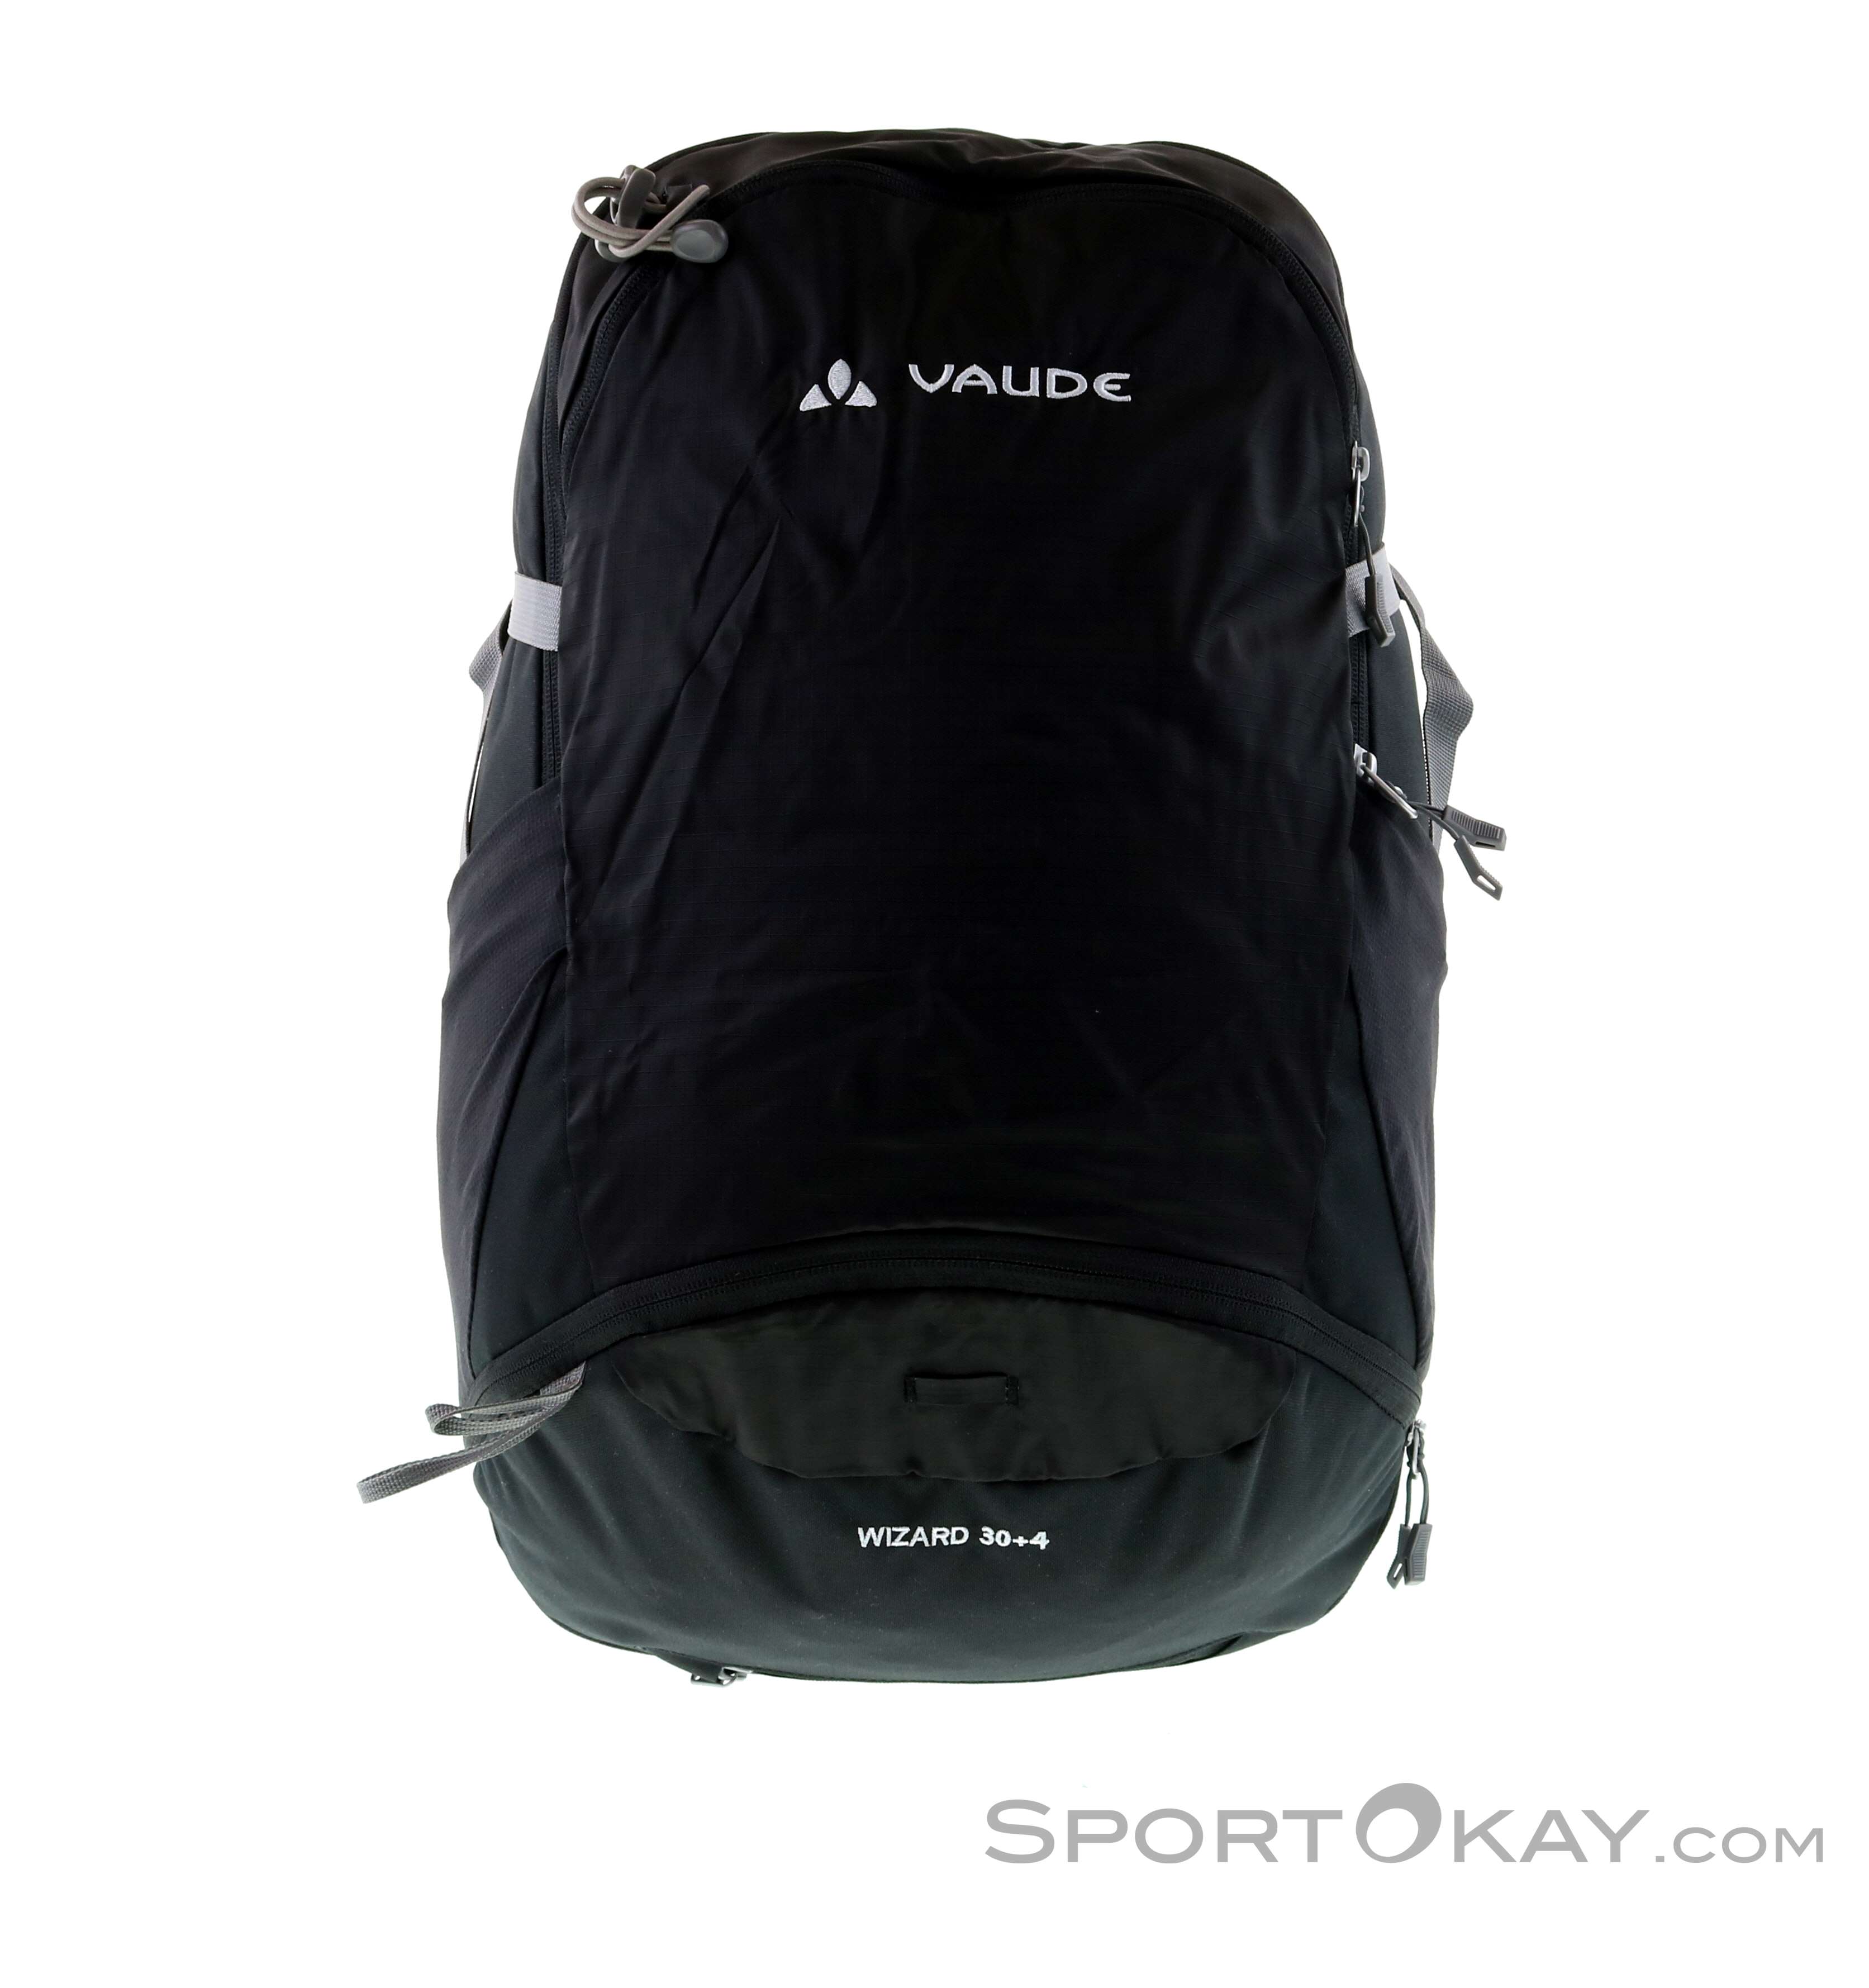 Black Summer 2018 VAUDE Protection Cover for Backpacks